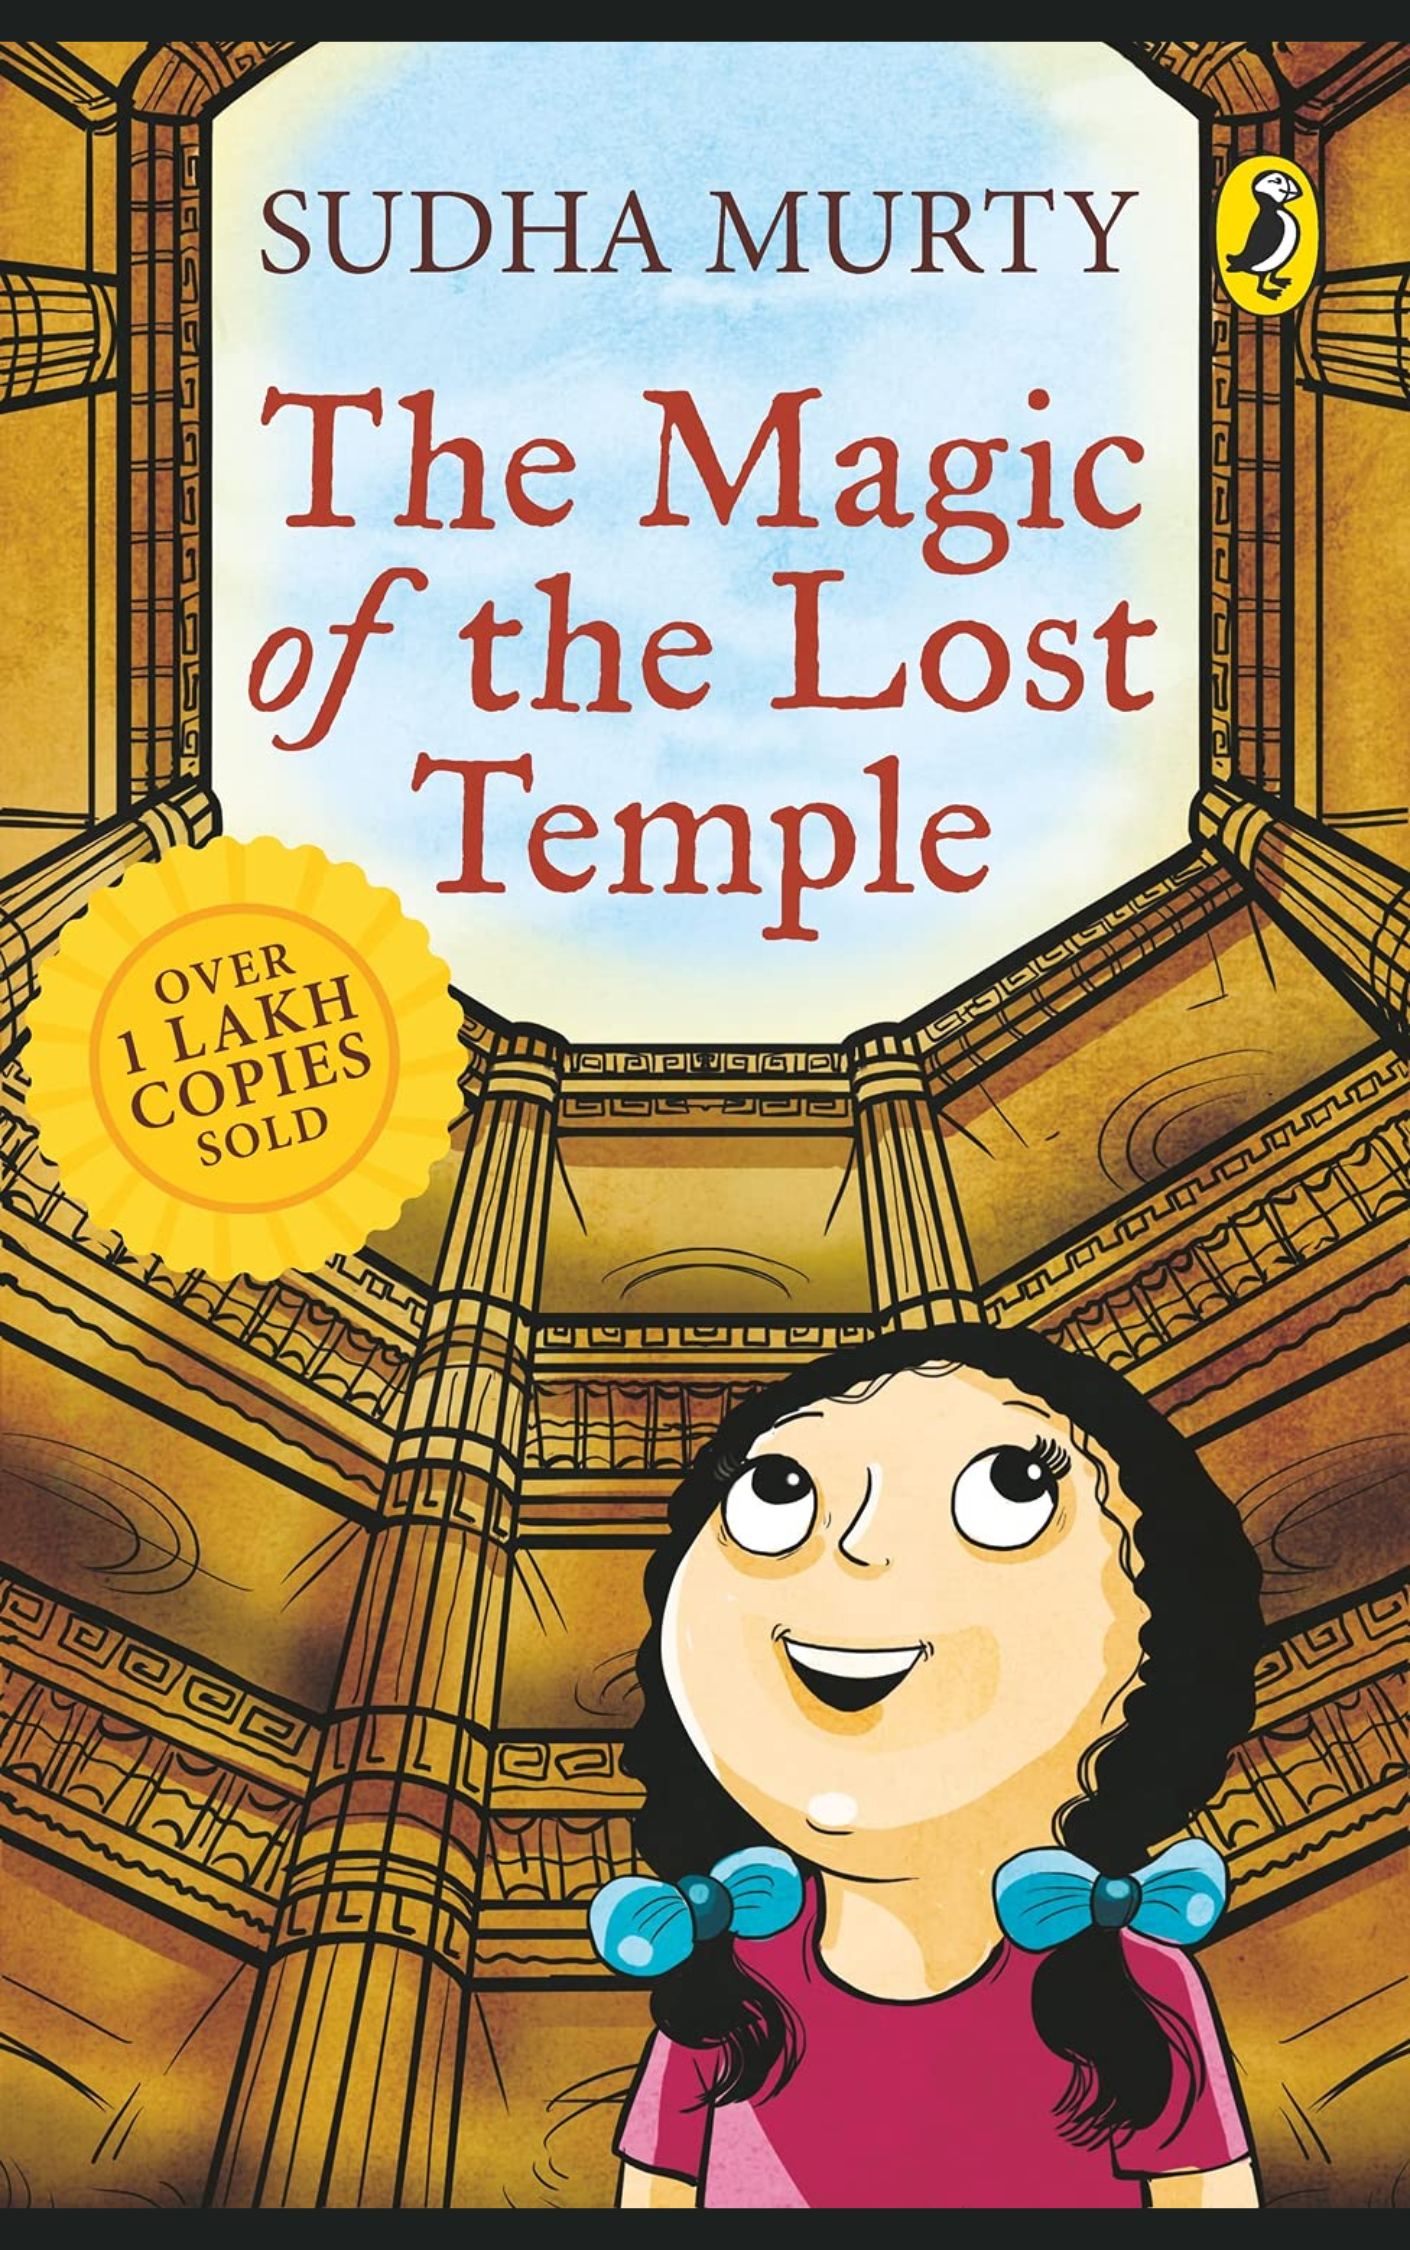 THE MAGIC OF THE LOST TEMPLE by SUDHA MURTY